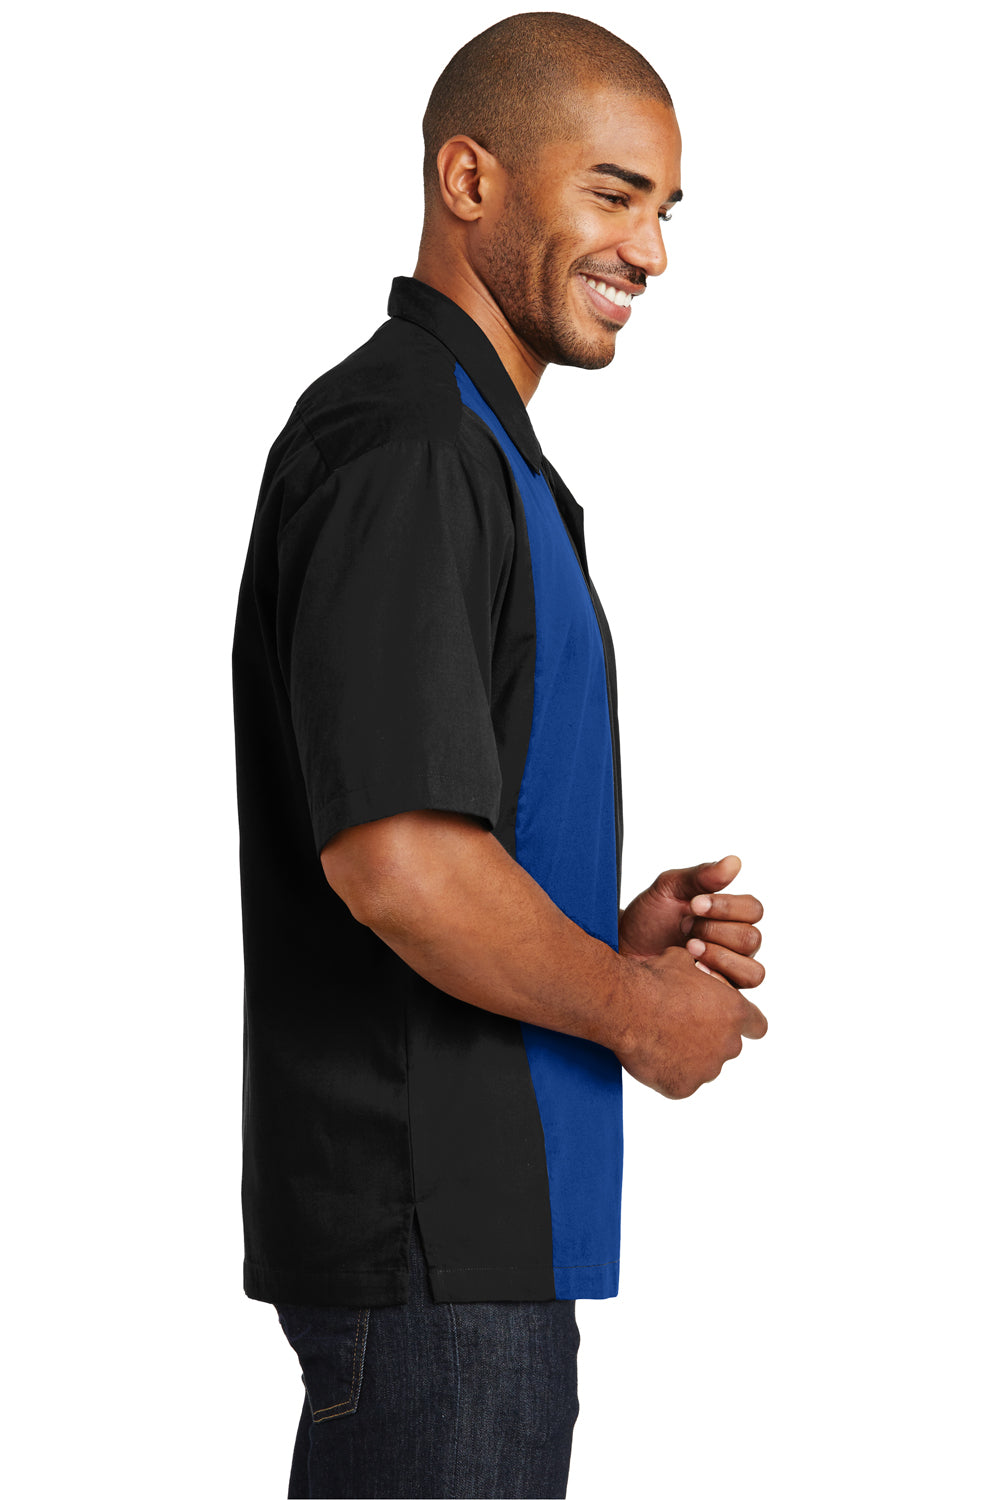 Port Authority S300 Mens Retro Easy Care Wrinkle Resistant Short Sleeve Button Down Camp Shirt Black/Royal Blue Side